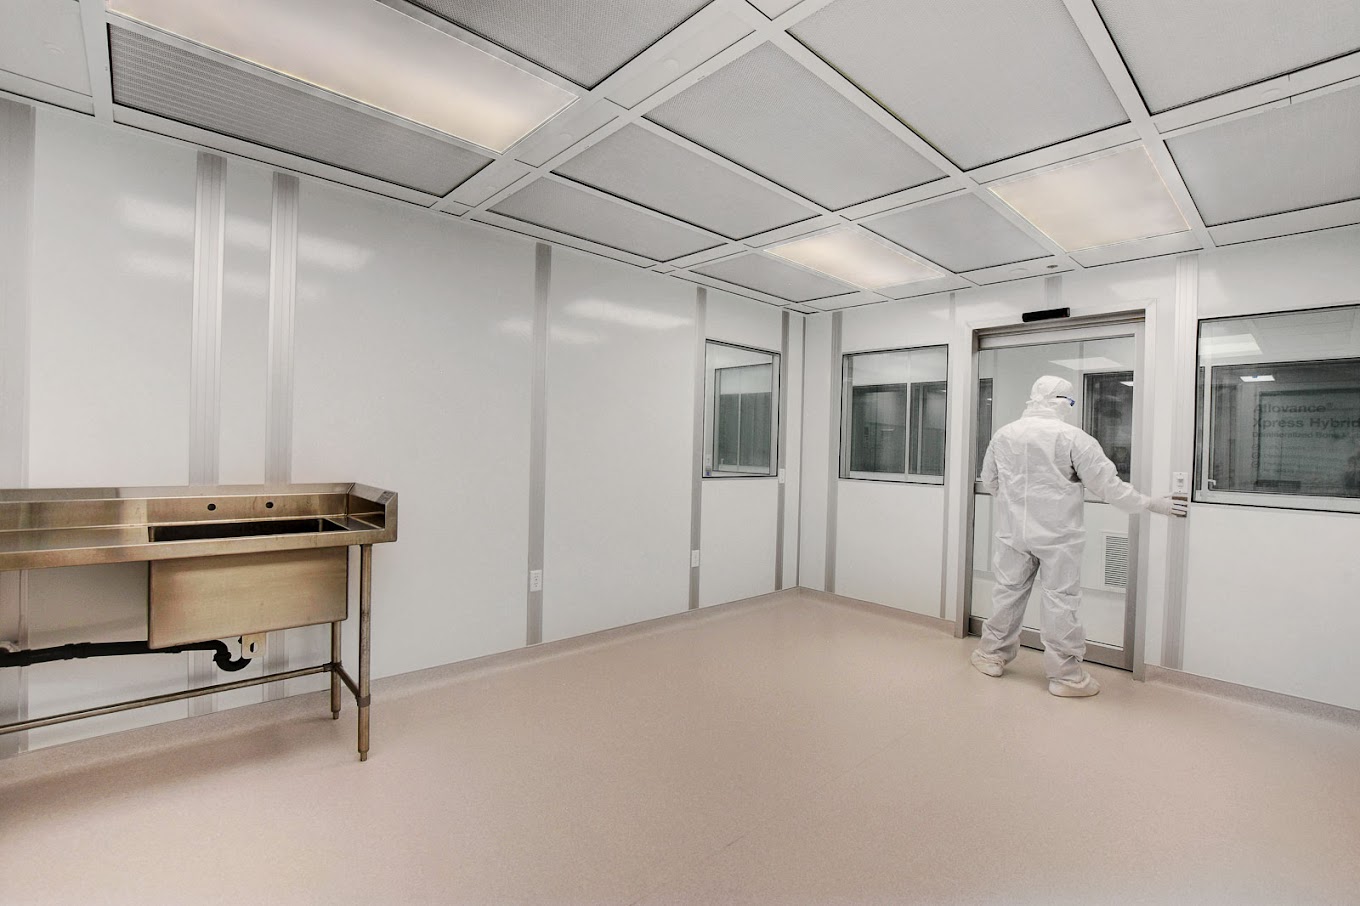 A man in gowning works in an ISO 4 cleanroom.